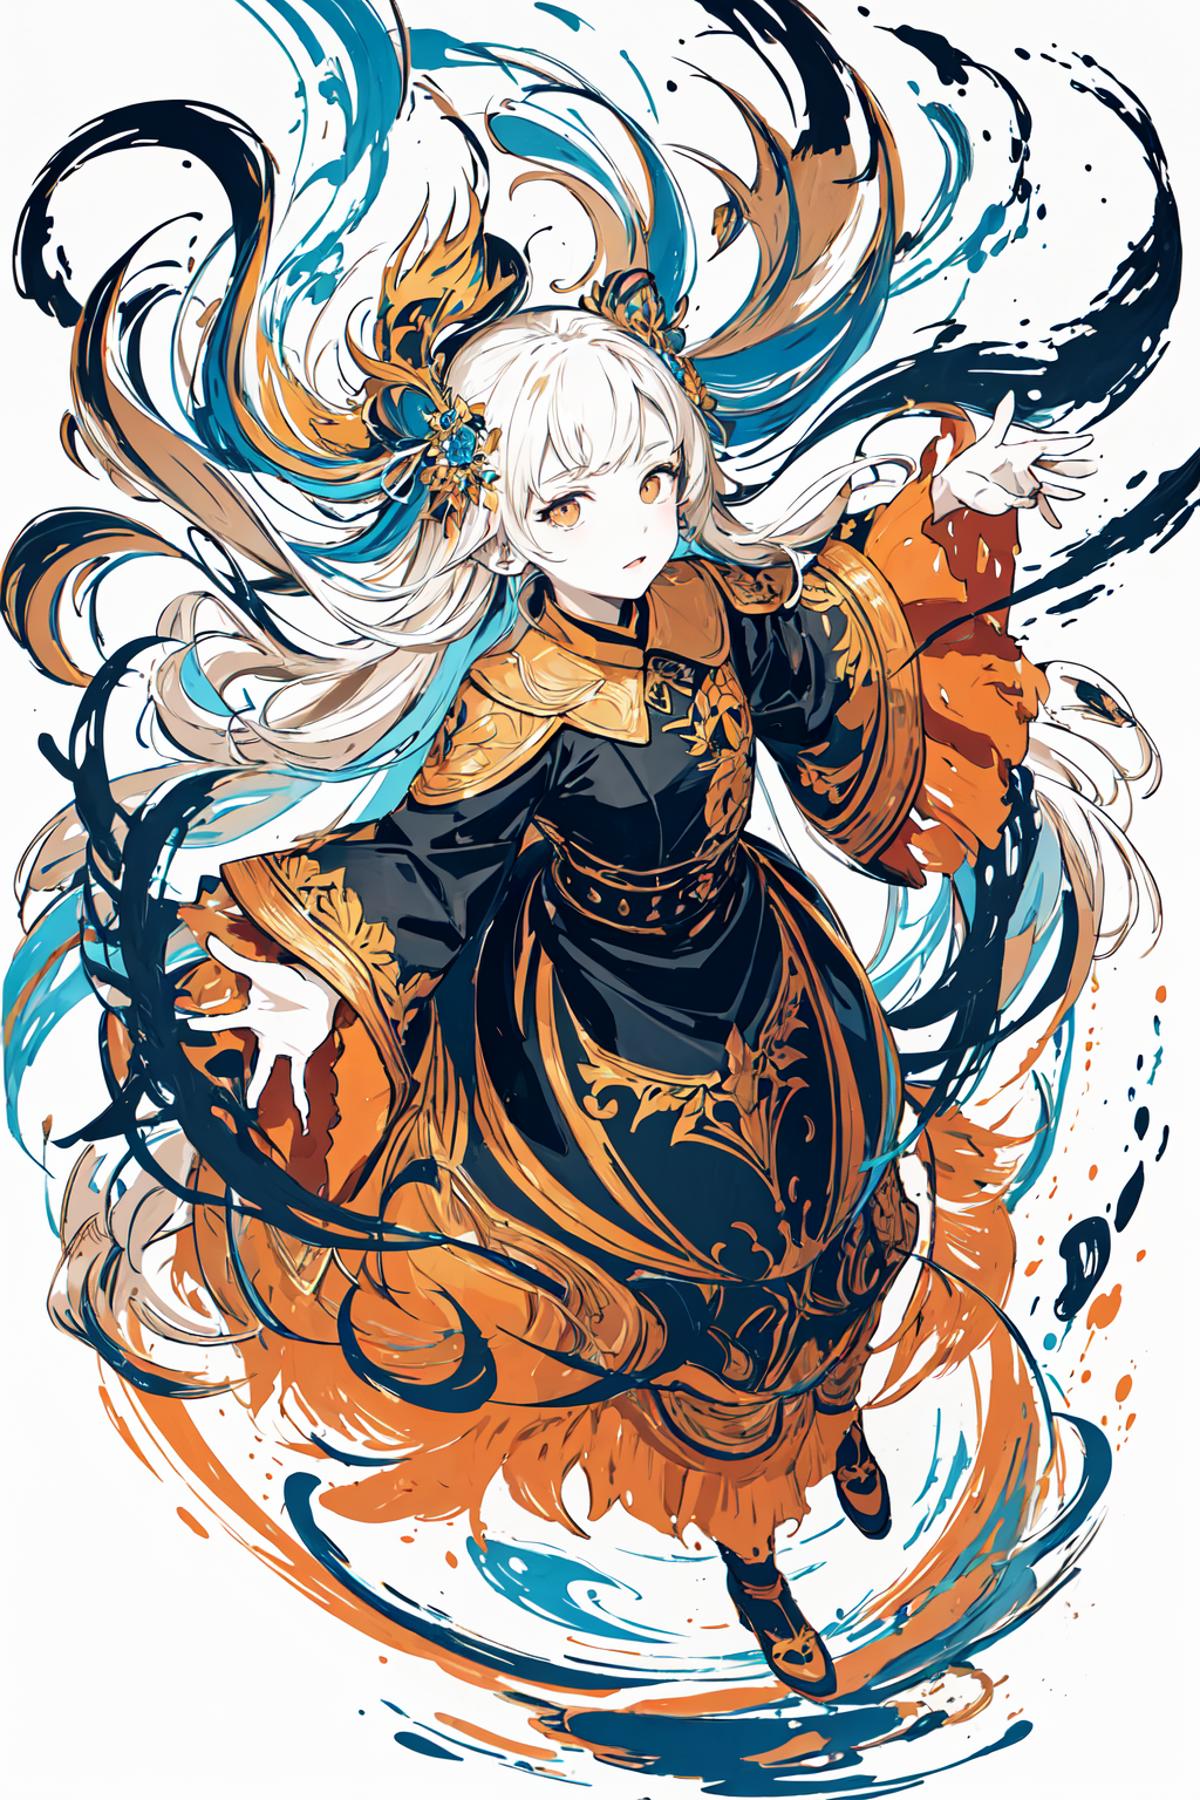 A beautifully illustrated female character with long blond hair and a flowing dress.